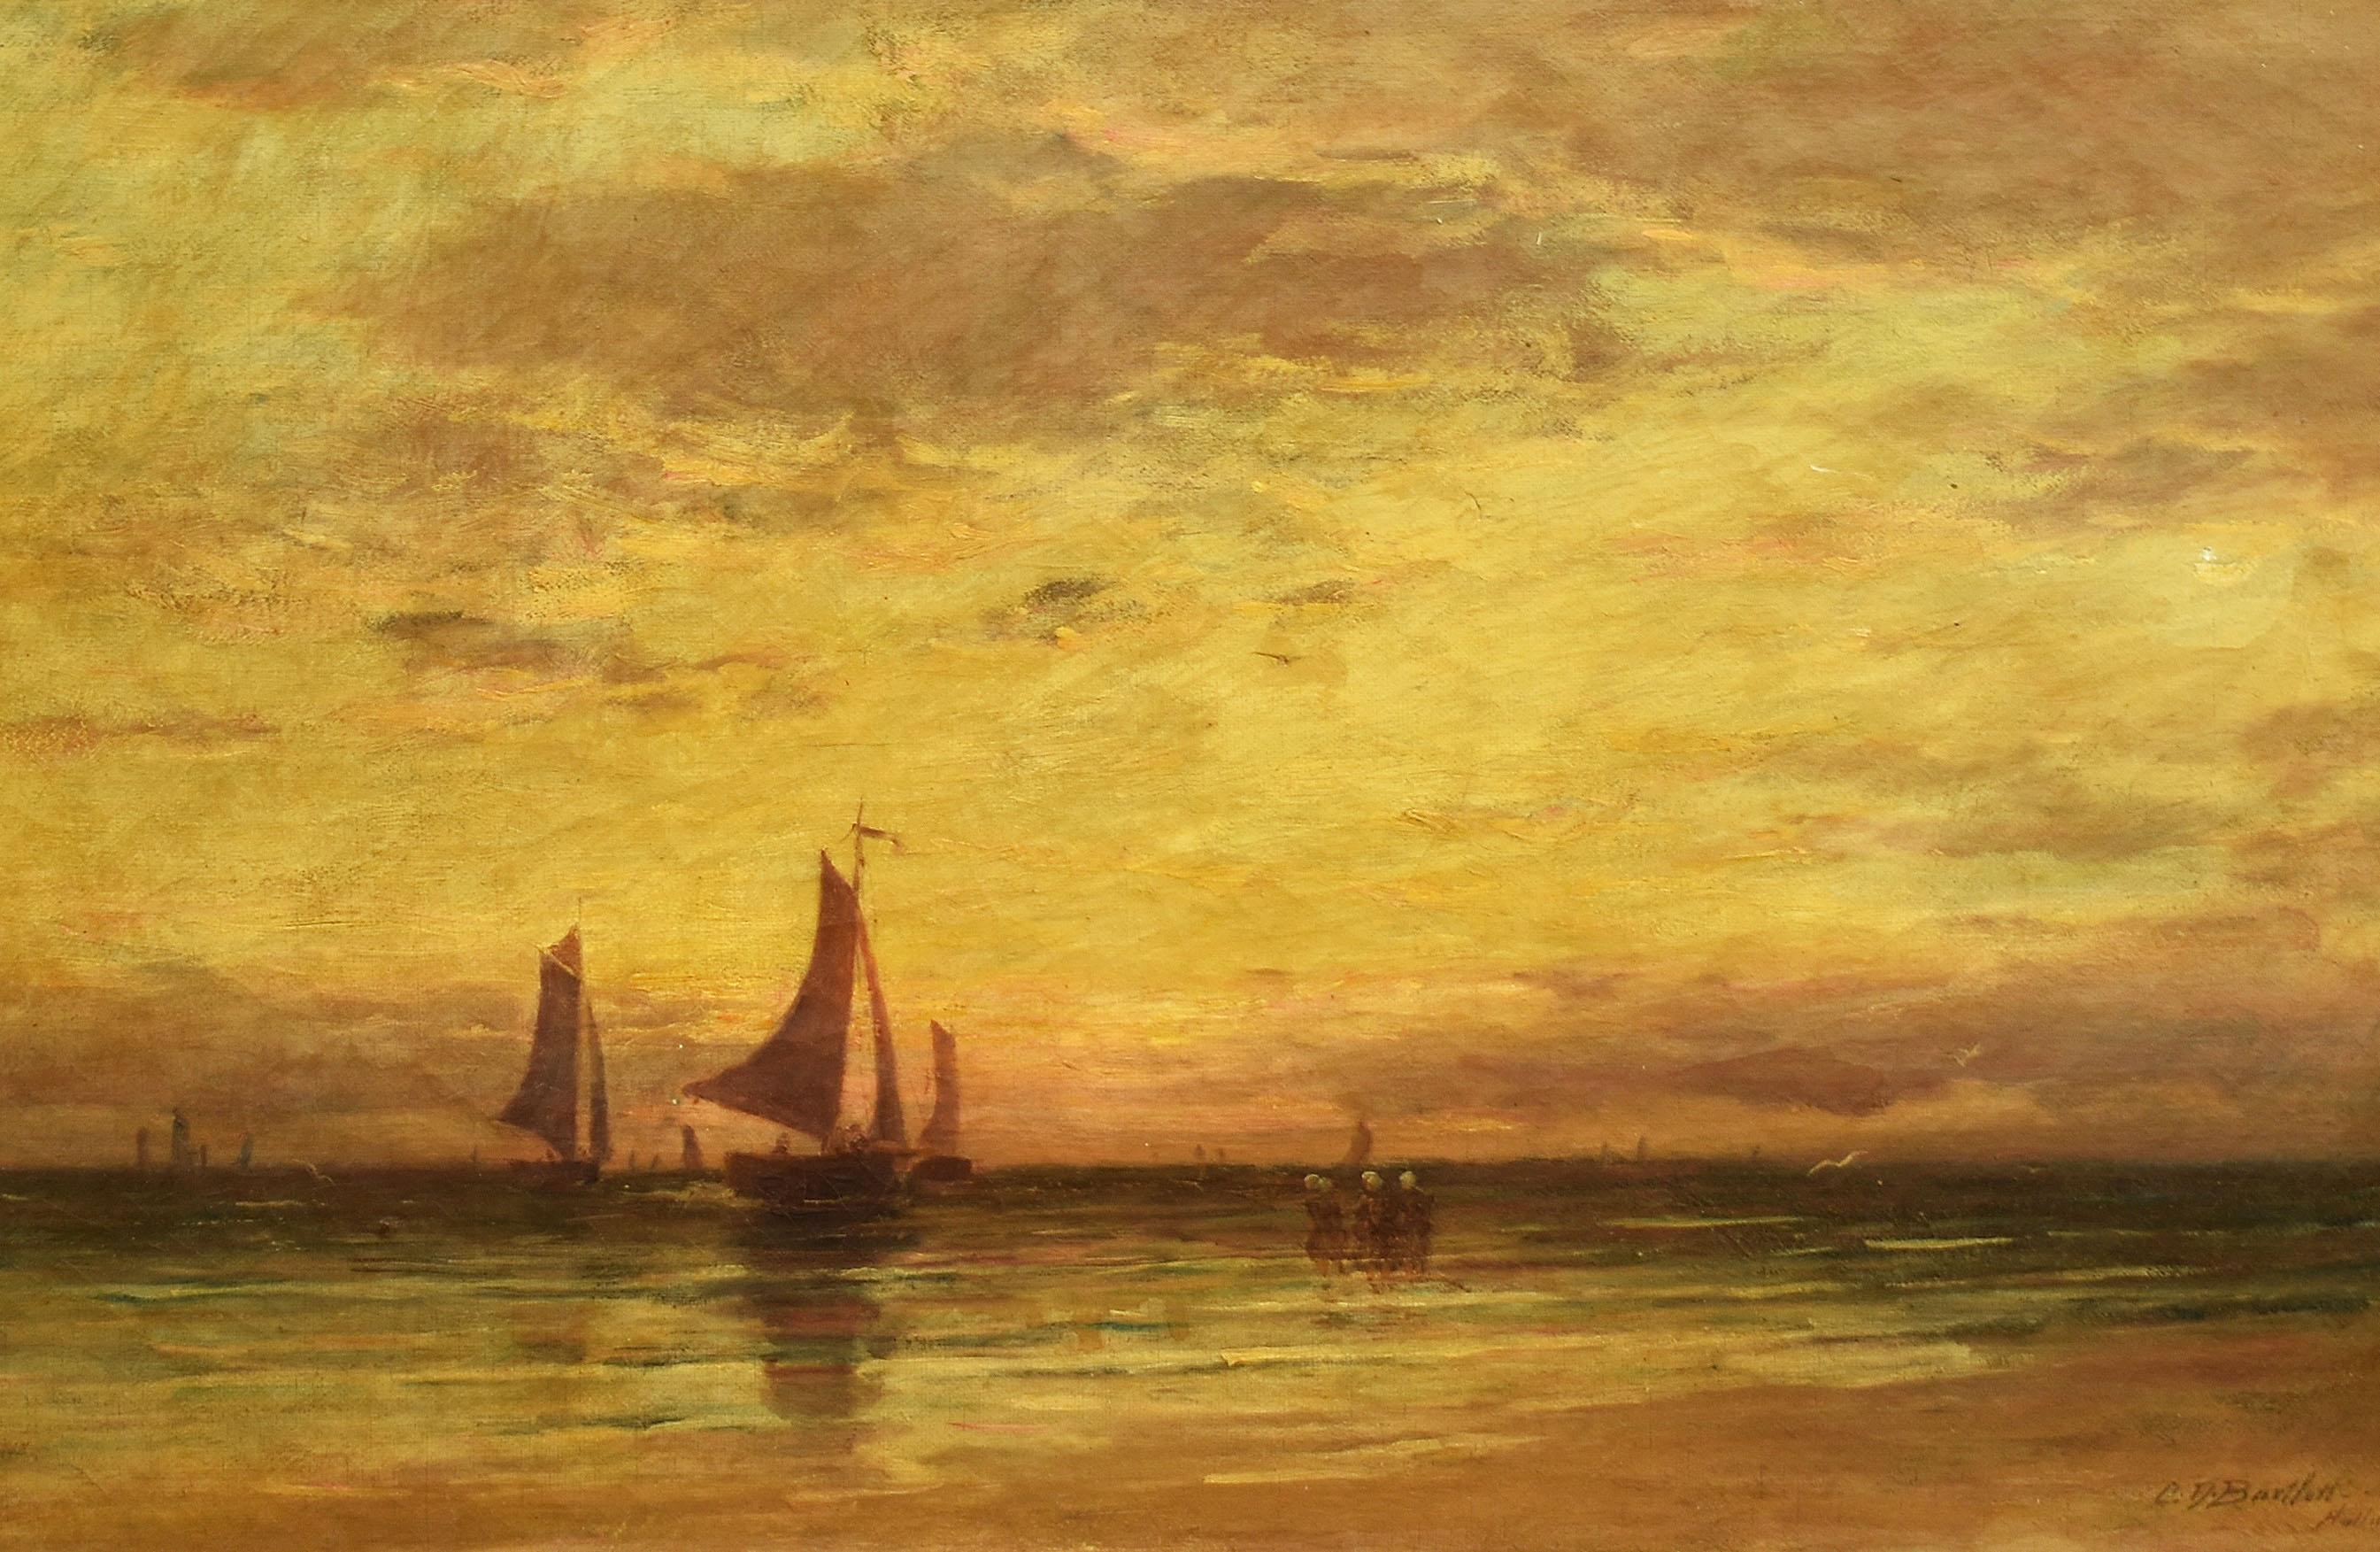 Antique American impressionist sunset seascape painting by Clarence Drew Bartlett  (born 1863).  Oil on canvas, circa 1897.  Signed.  Displayed in a period giltwood frame.  Image size, 24